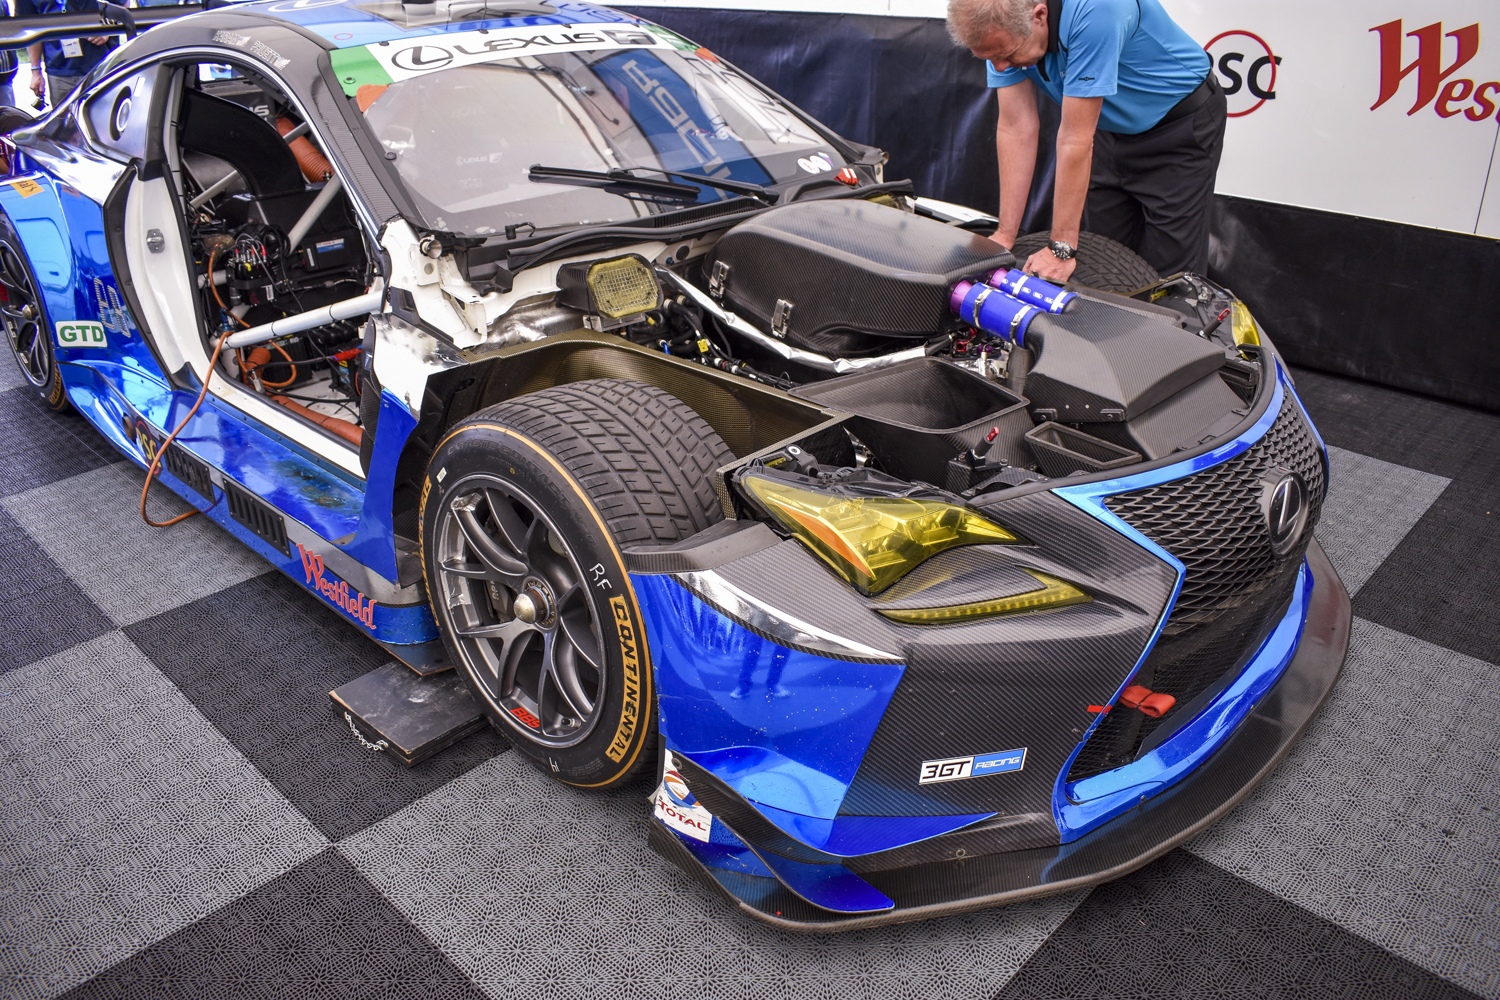 Front of the Lexus RC F GT3 angled to the right showing off the right wheel and engine